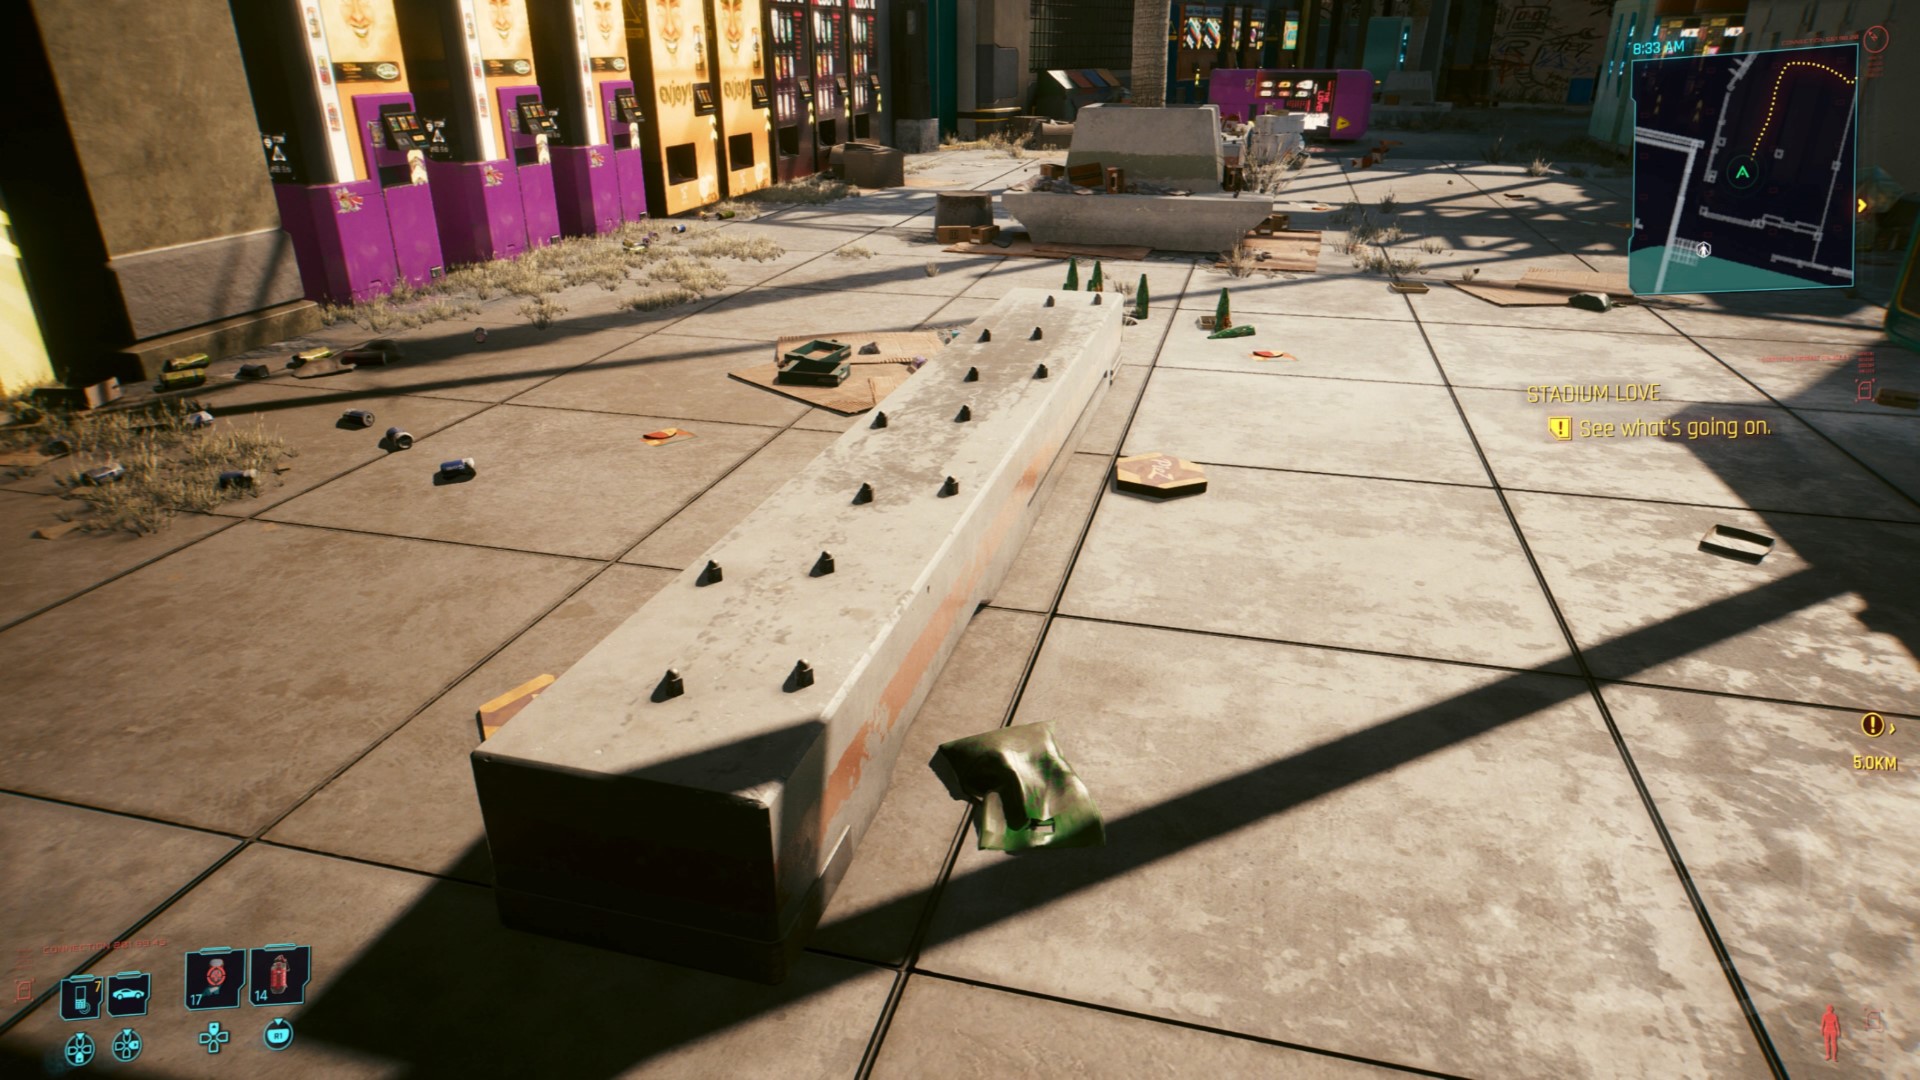 Image showing a bench with anti-homeless measures in Night City in the game Cyberpunk 2077.